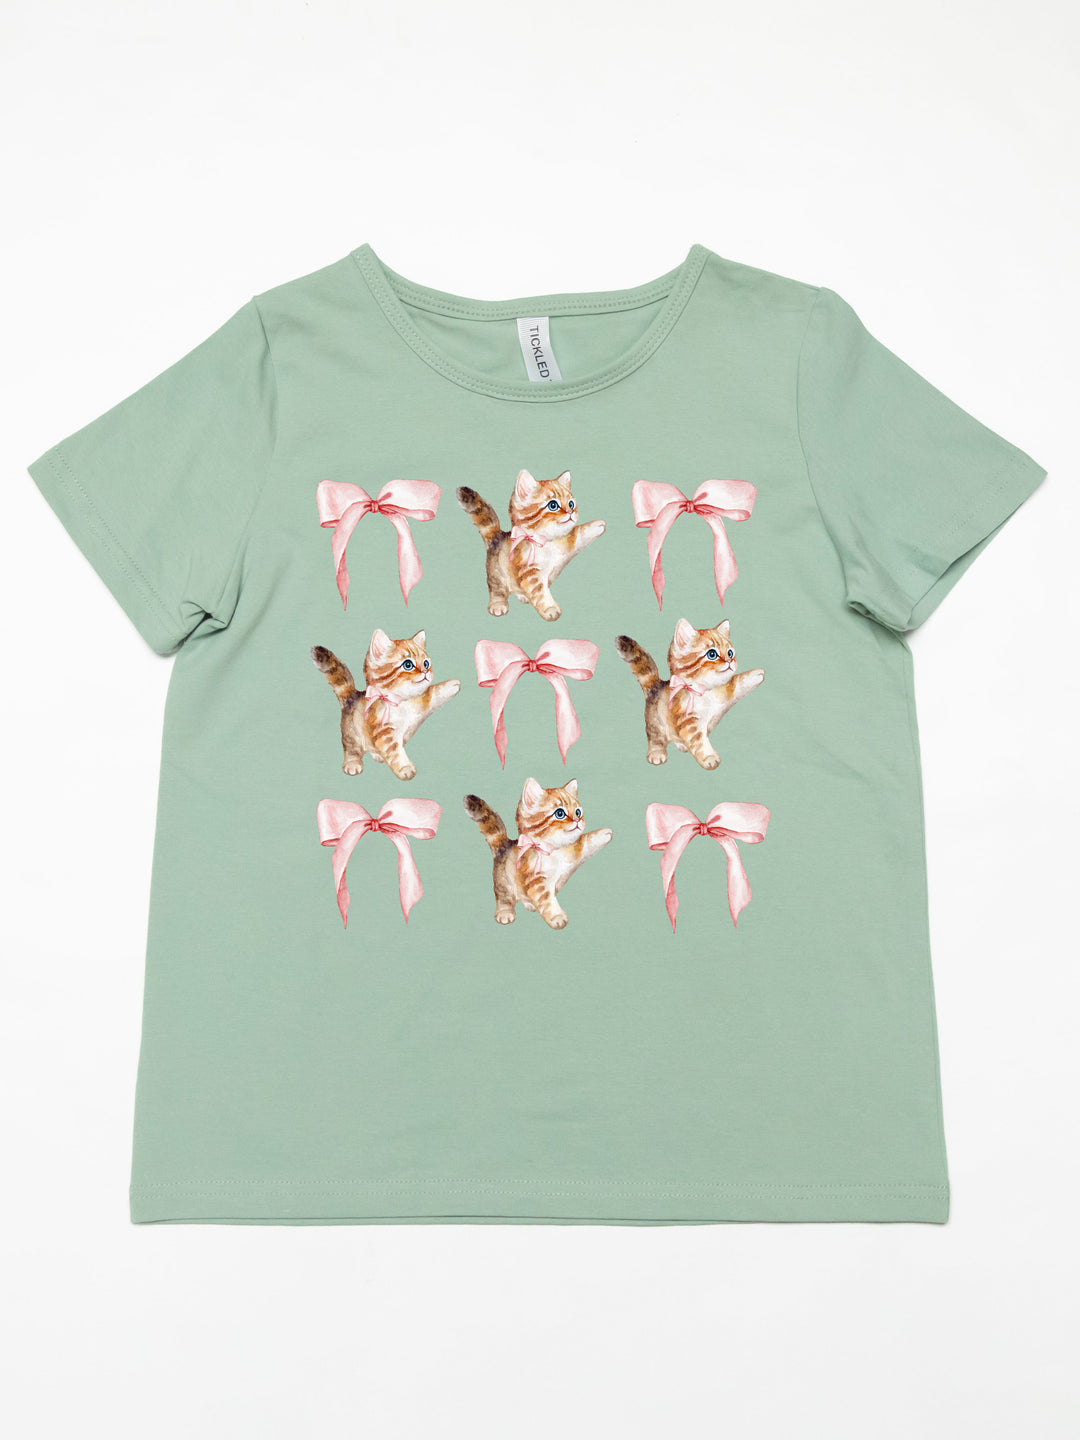 Kittens & Bows Kids Graphic Tee